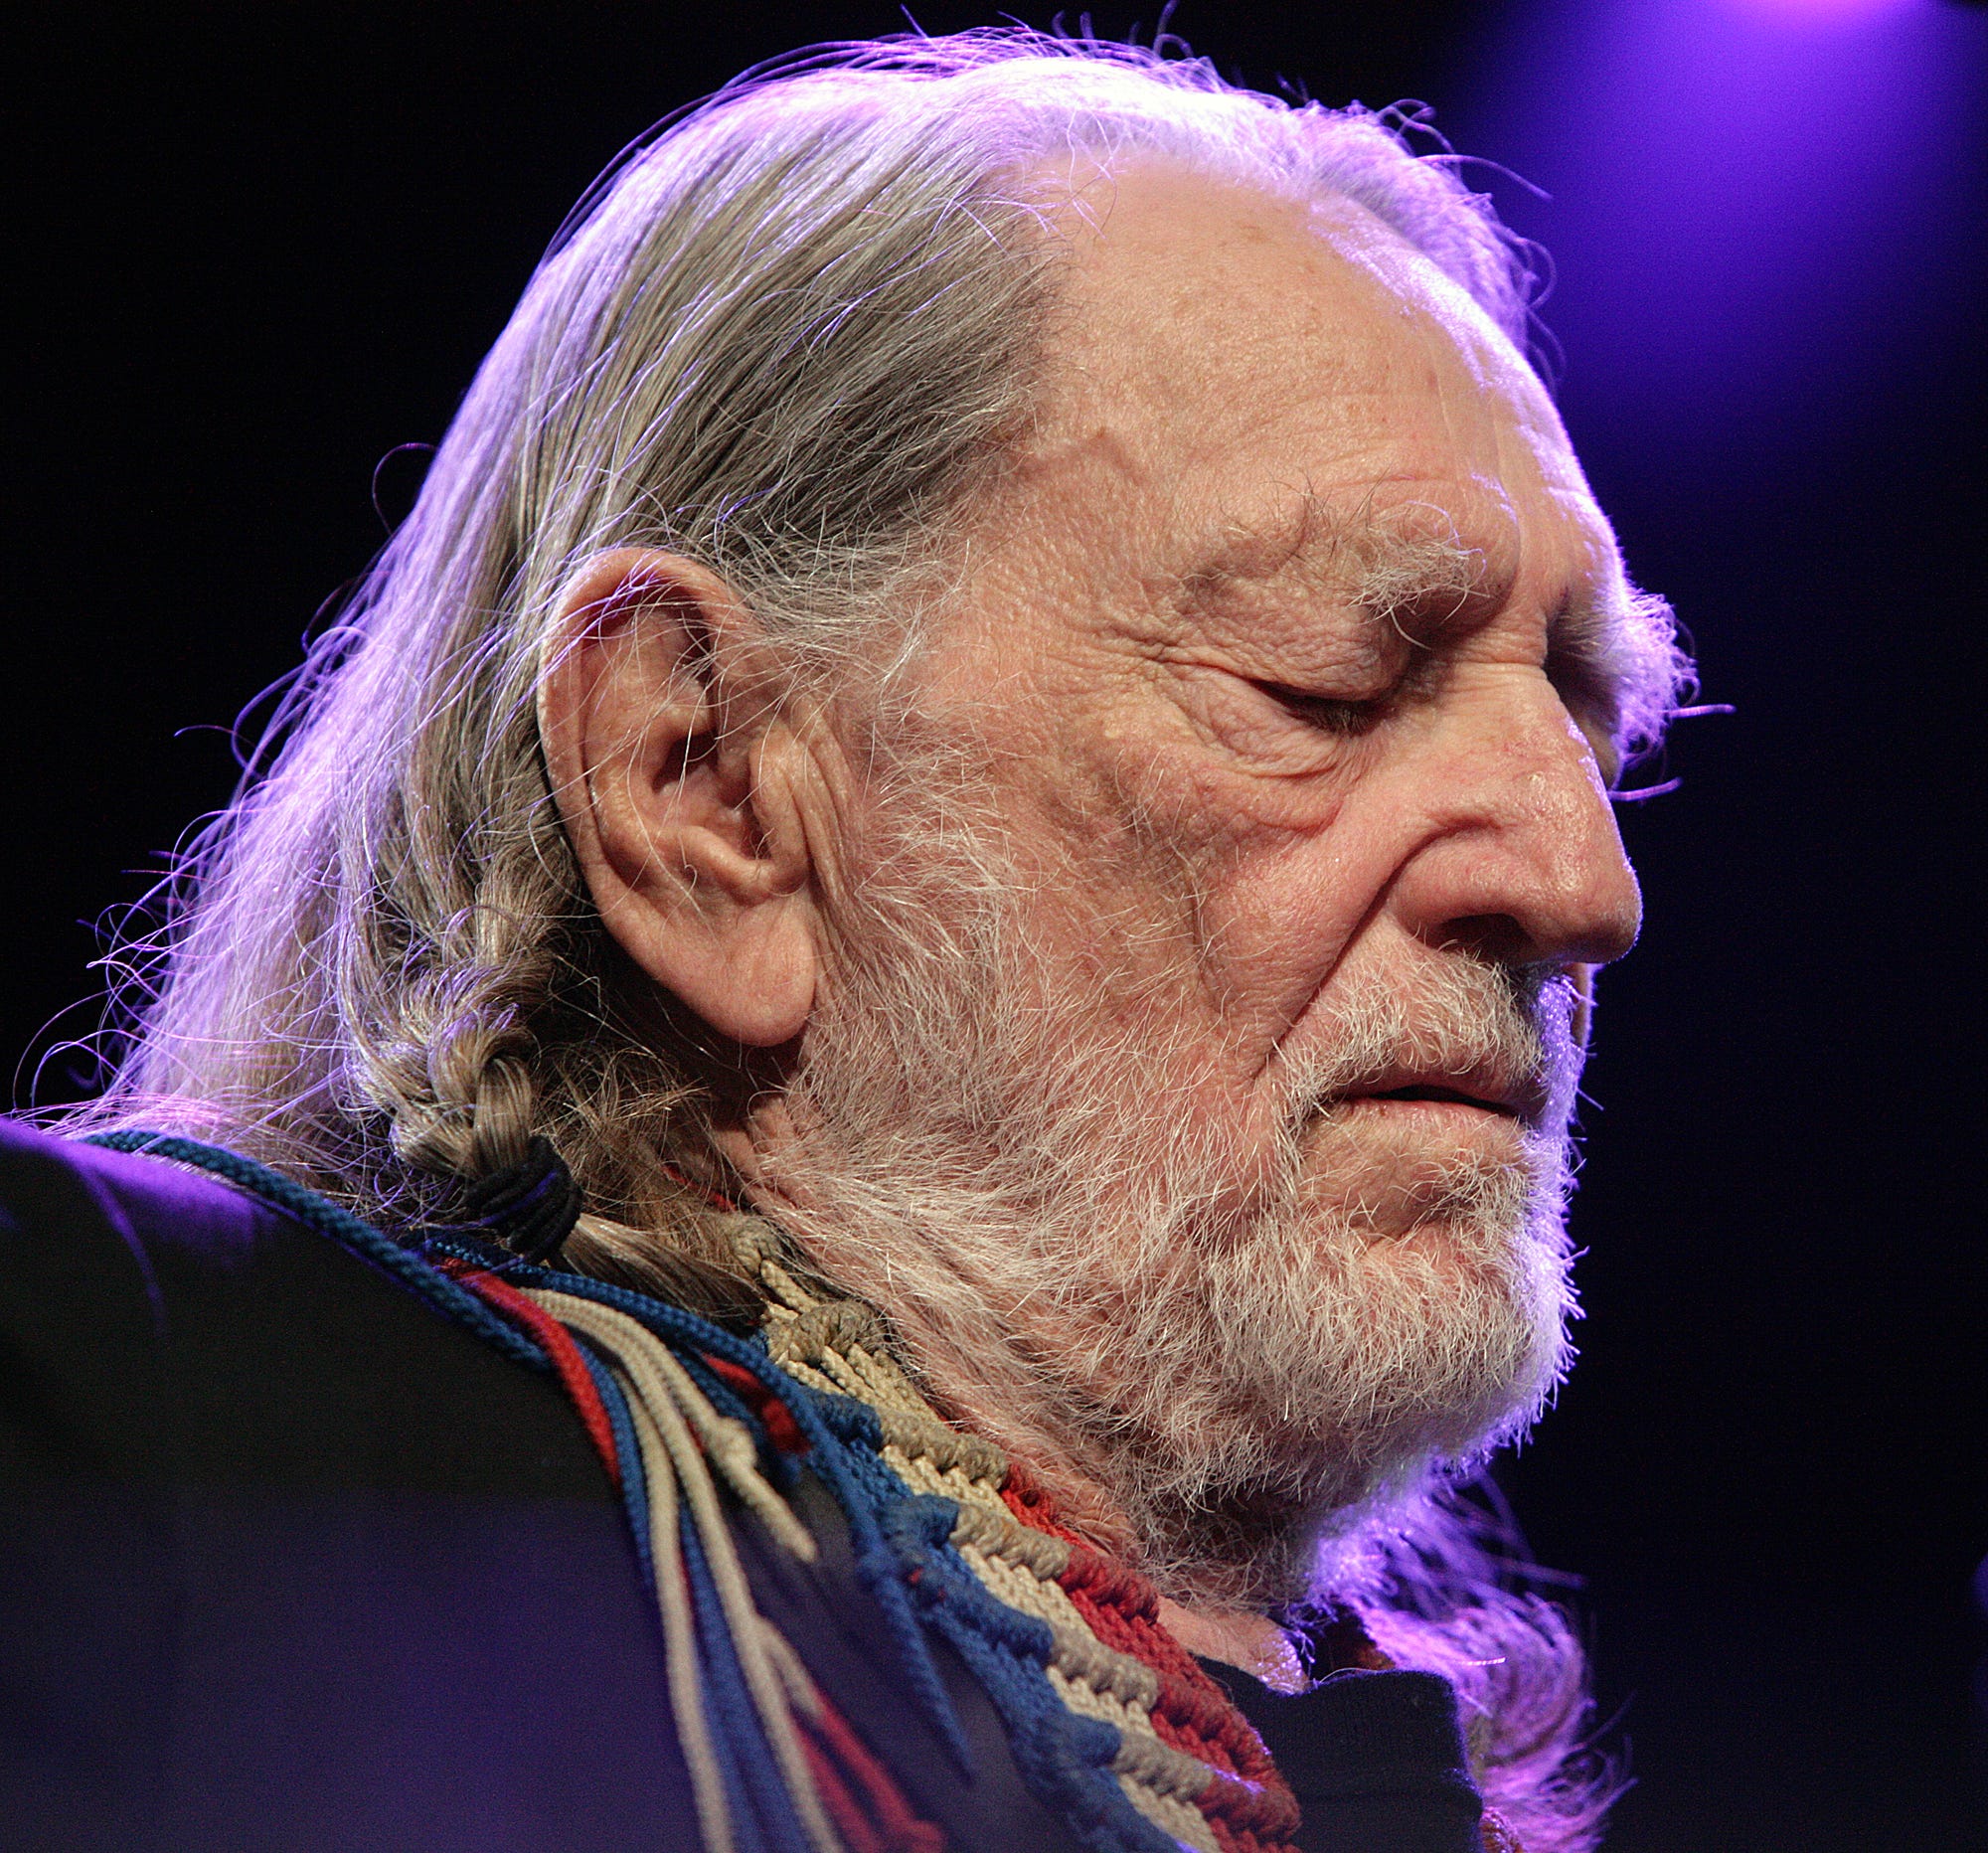 Willie Nelson performs with the Austin Symphony to christen the new Austin City Limits studio at the W Hotel on February 13, 2011.